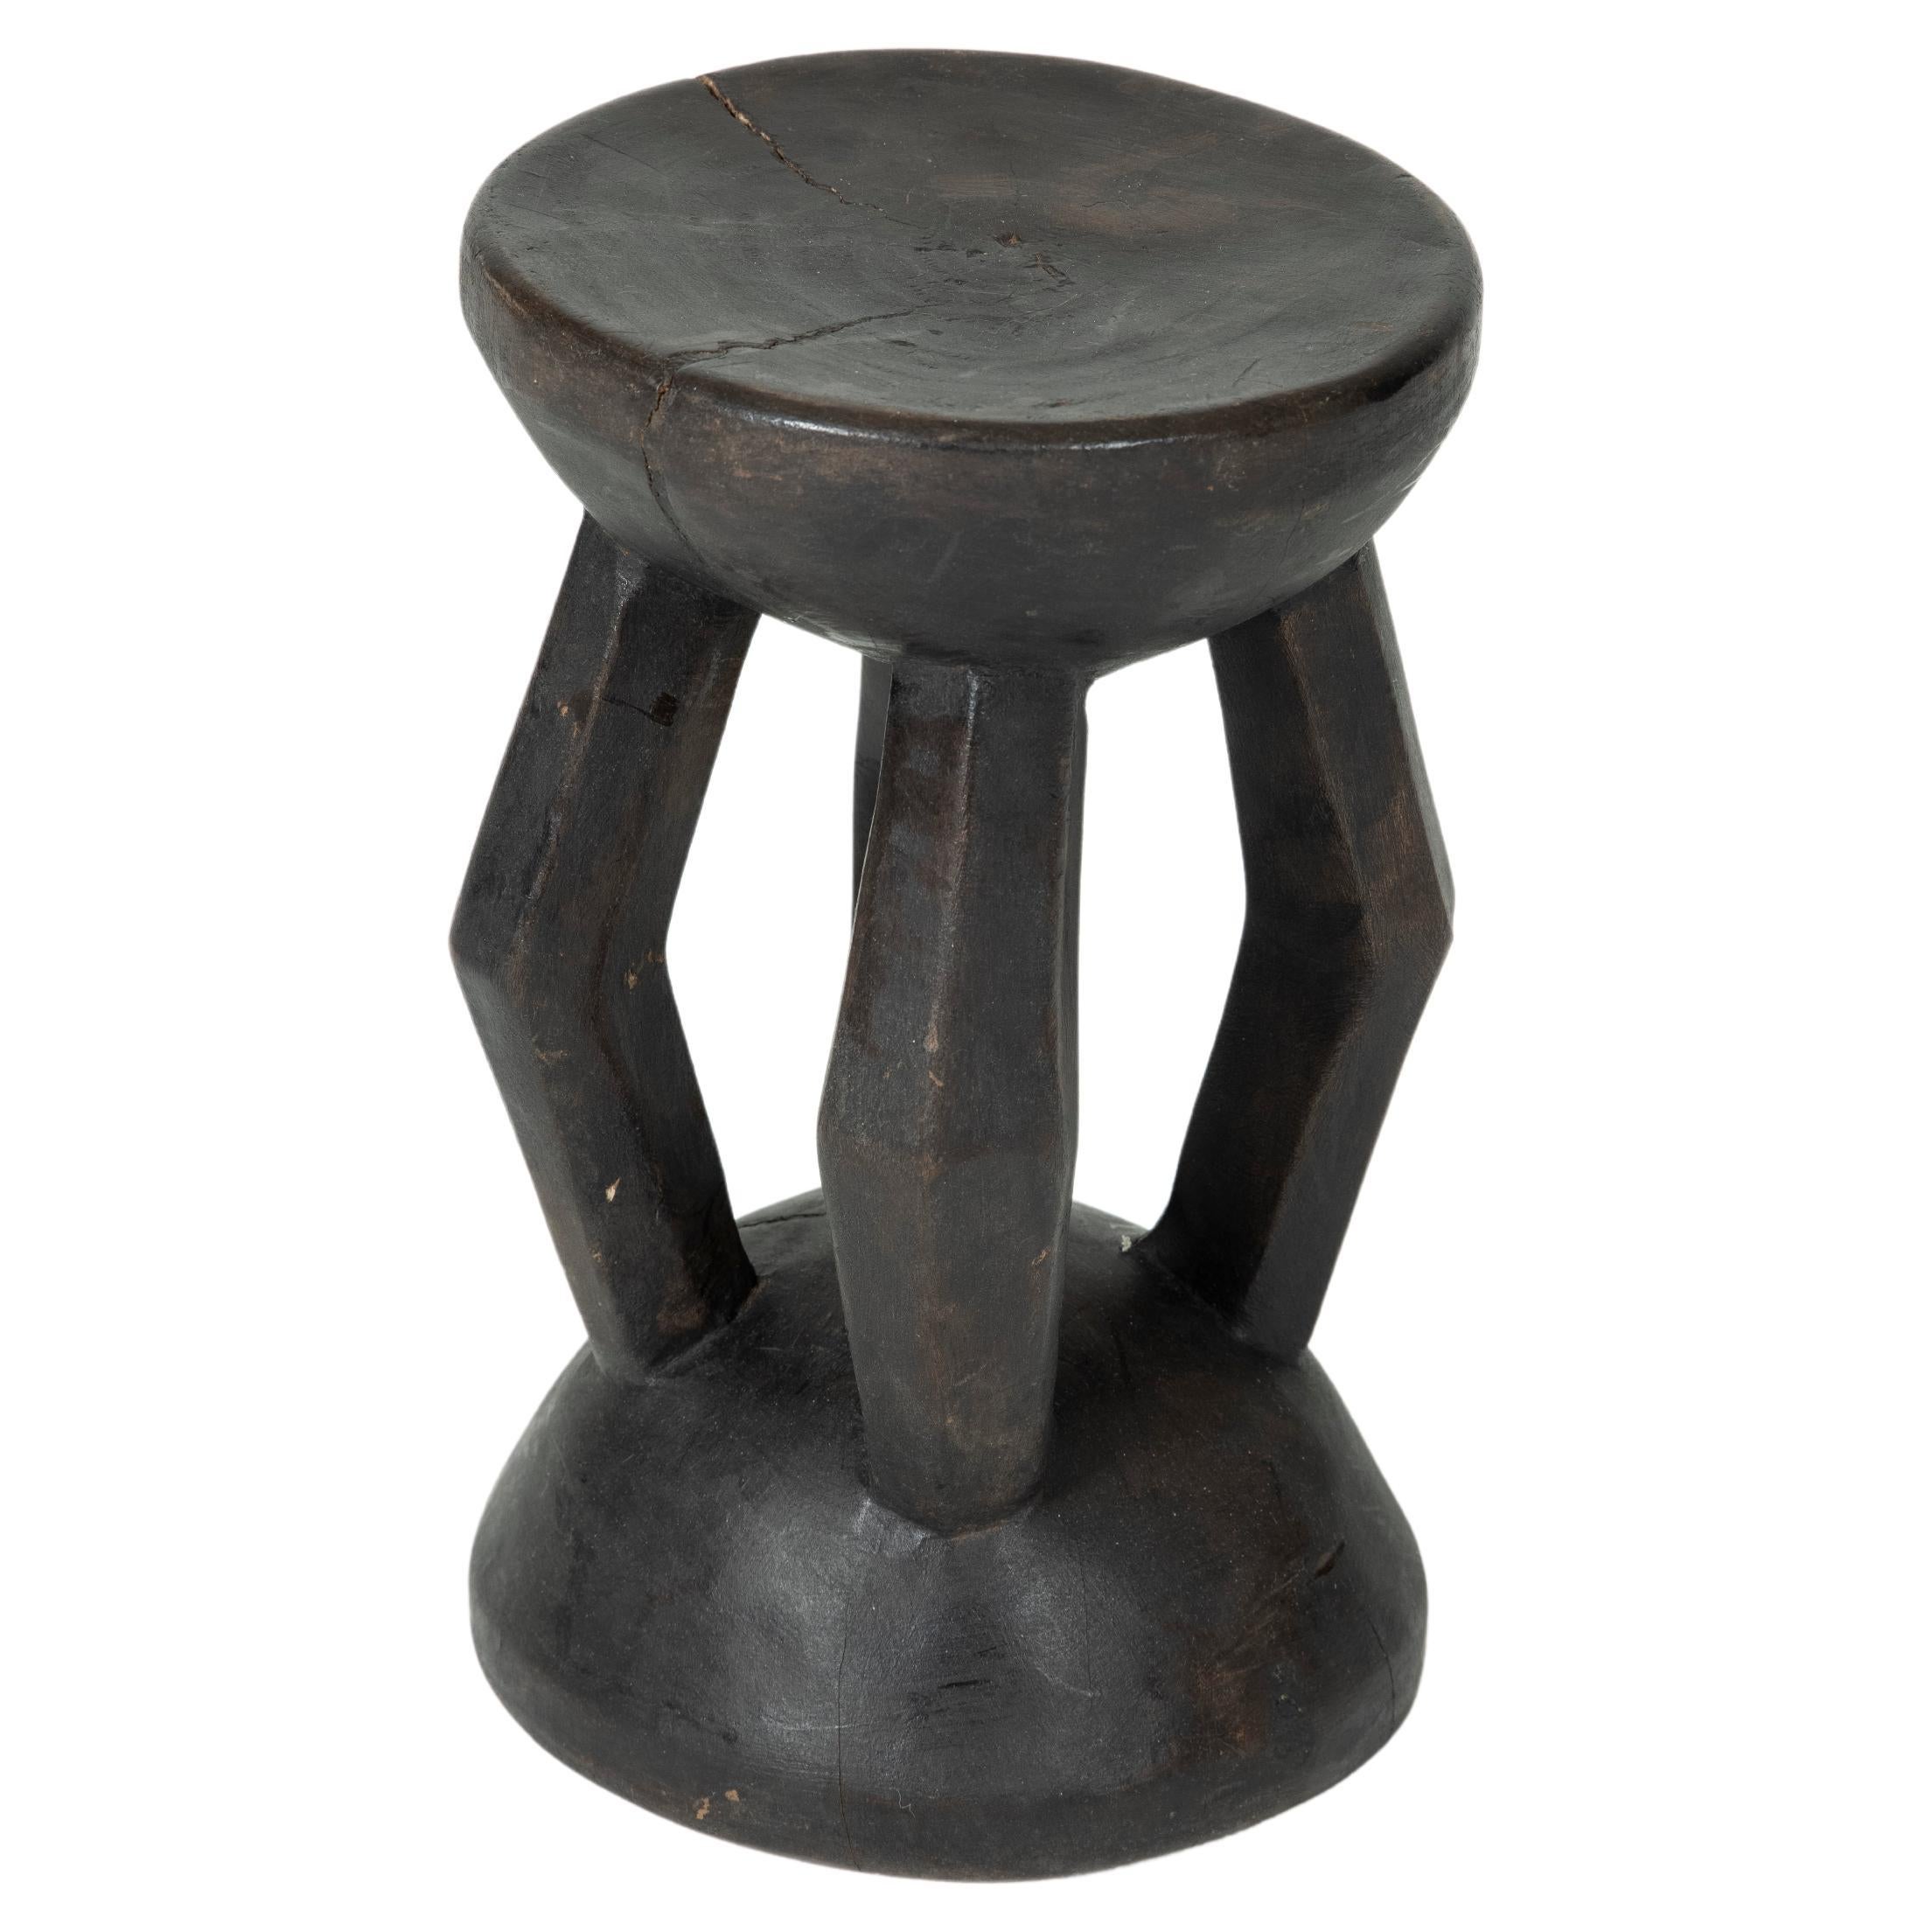 Stool or Side Table Dogon